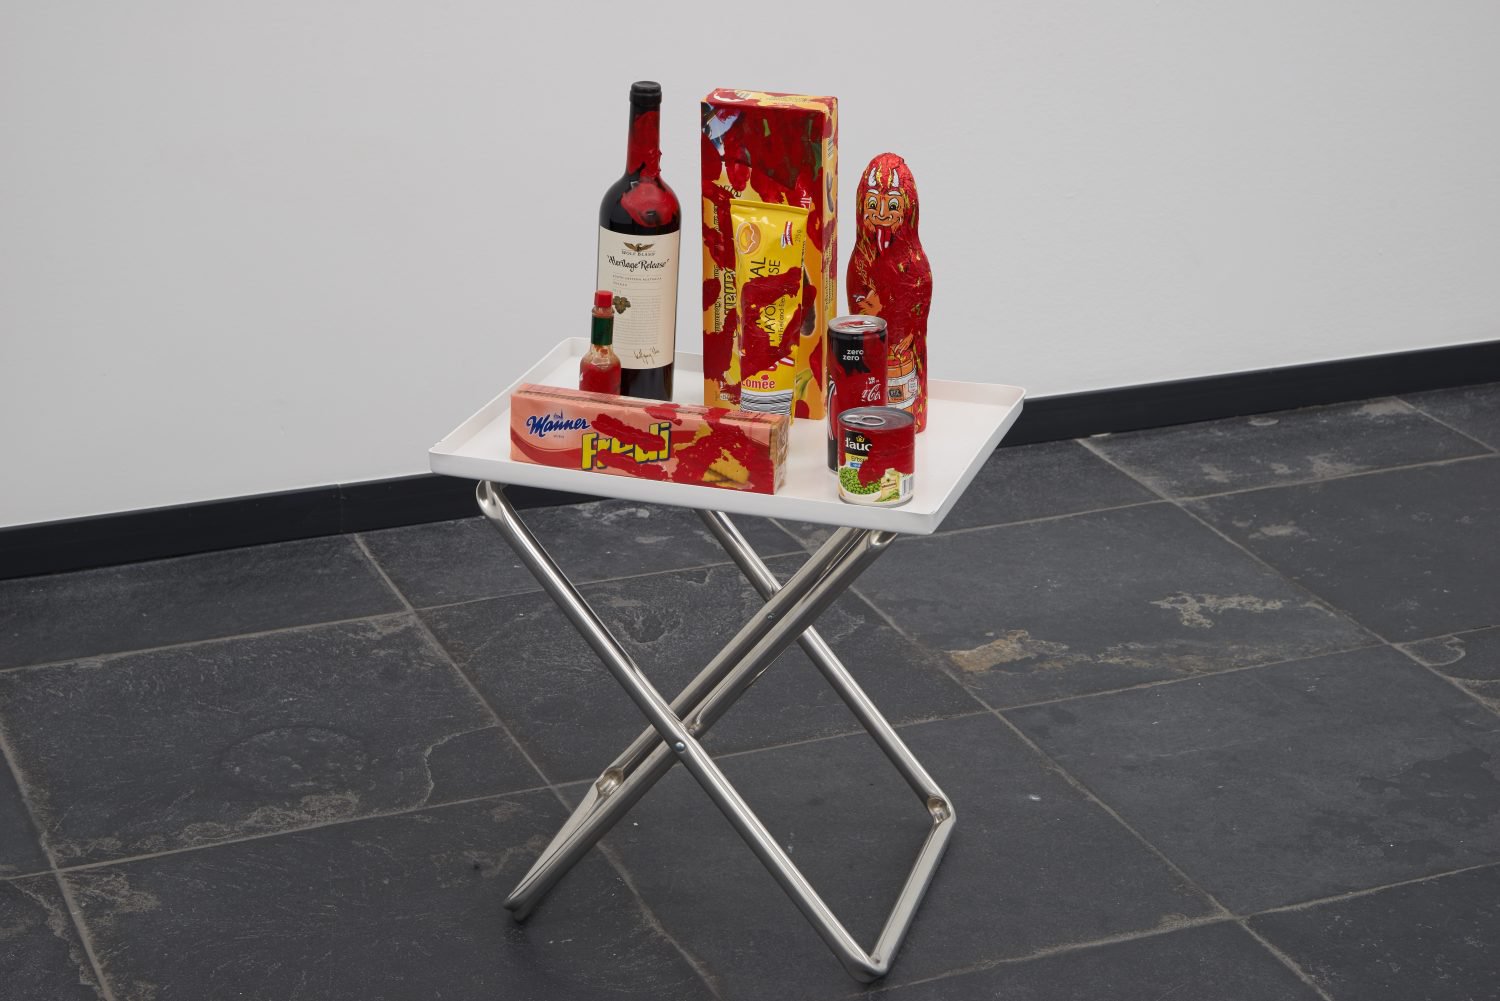 Anna-Sophie BergerComplicit 1Acrylic paint on &quot;heritage release&quot; red wine bottle, chocolate bananas, mayonaise, chocolate krampus, coke zero, manner fredi biskuits, tabasco, PVC, aluminium and polyester70 x 46 x 36 cmArs Viva, S.M.A.K., Ghent, 2018